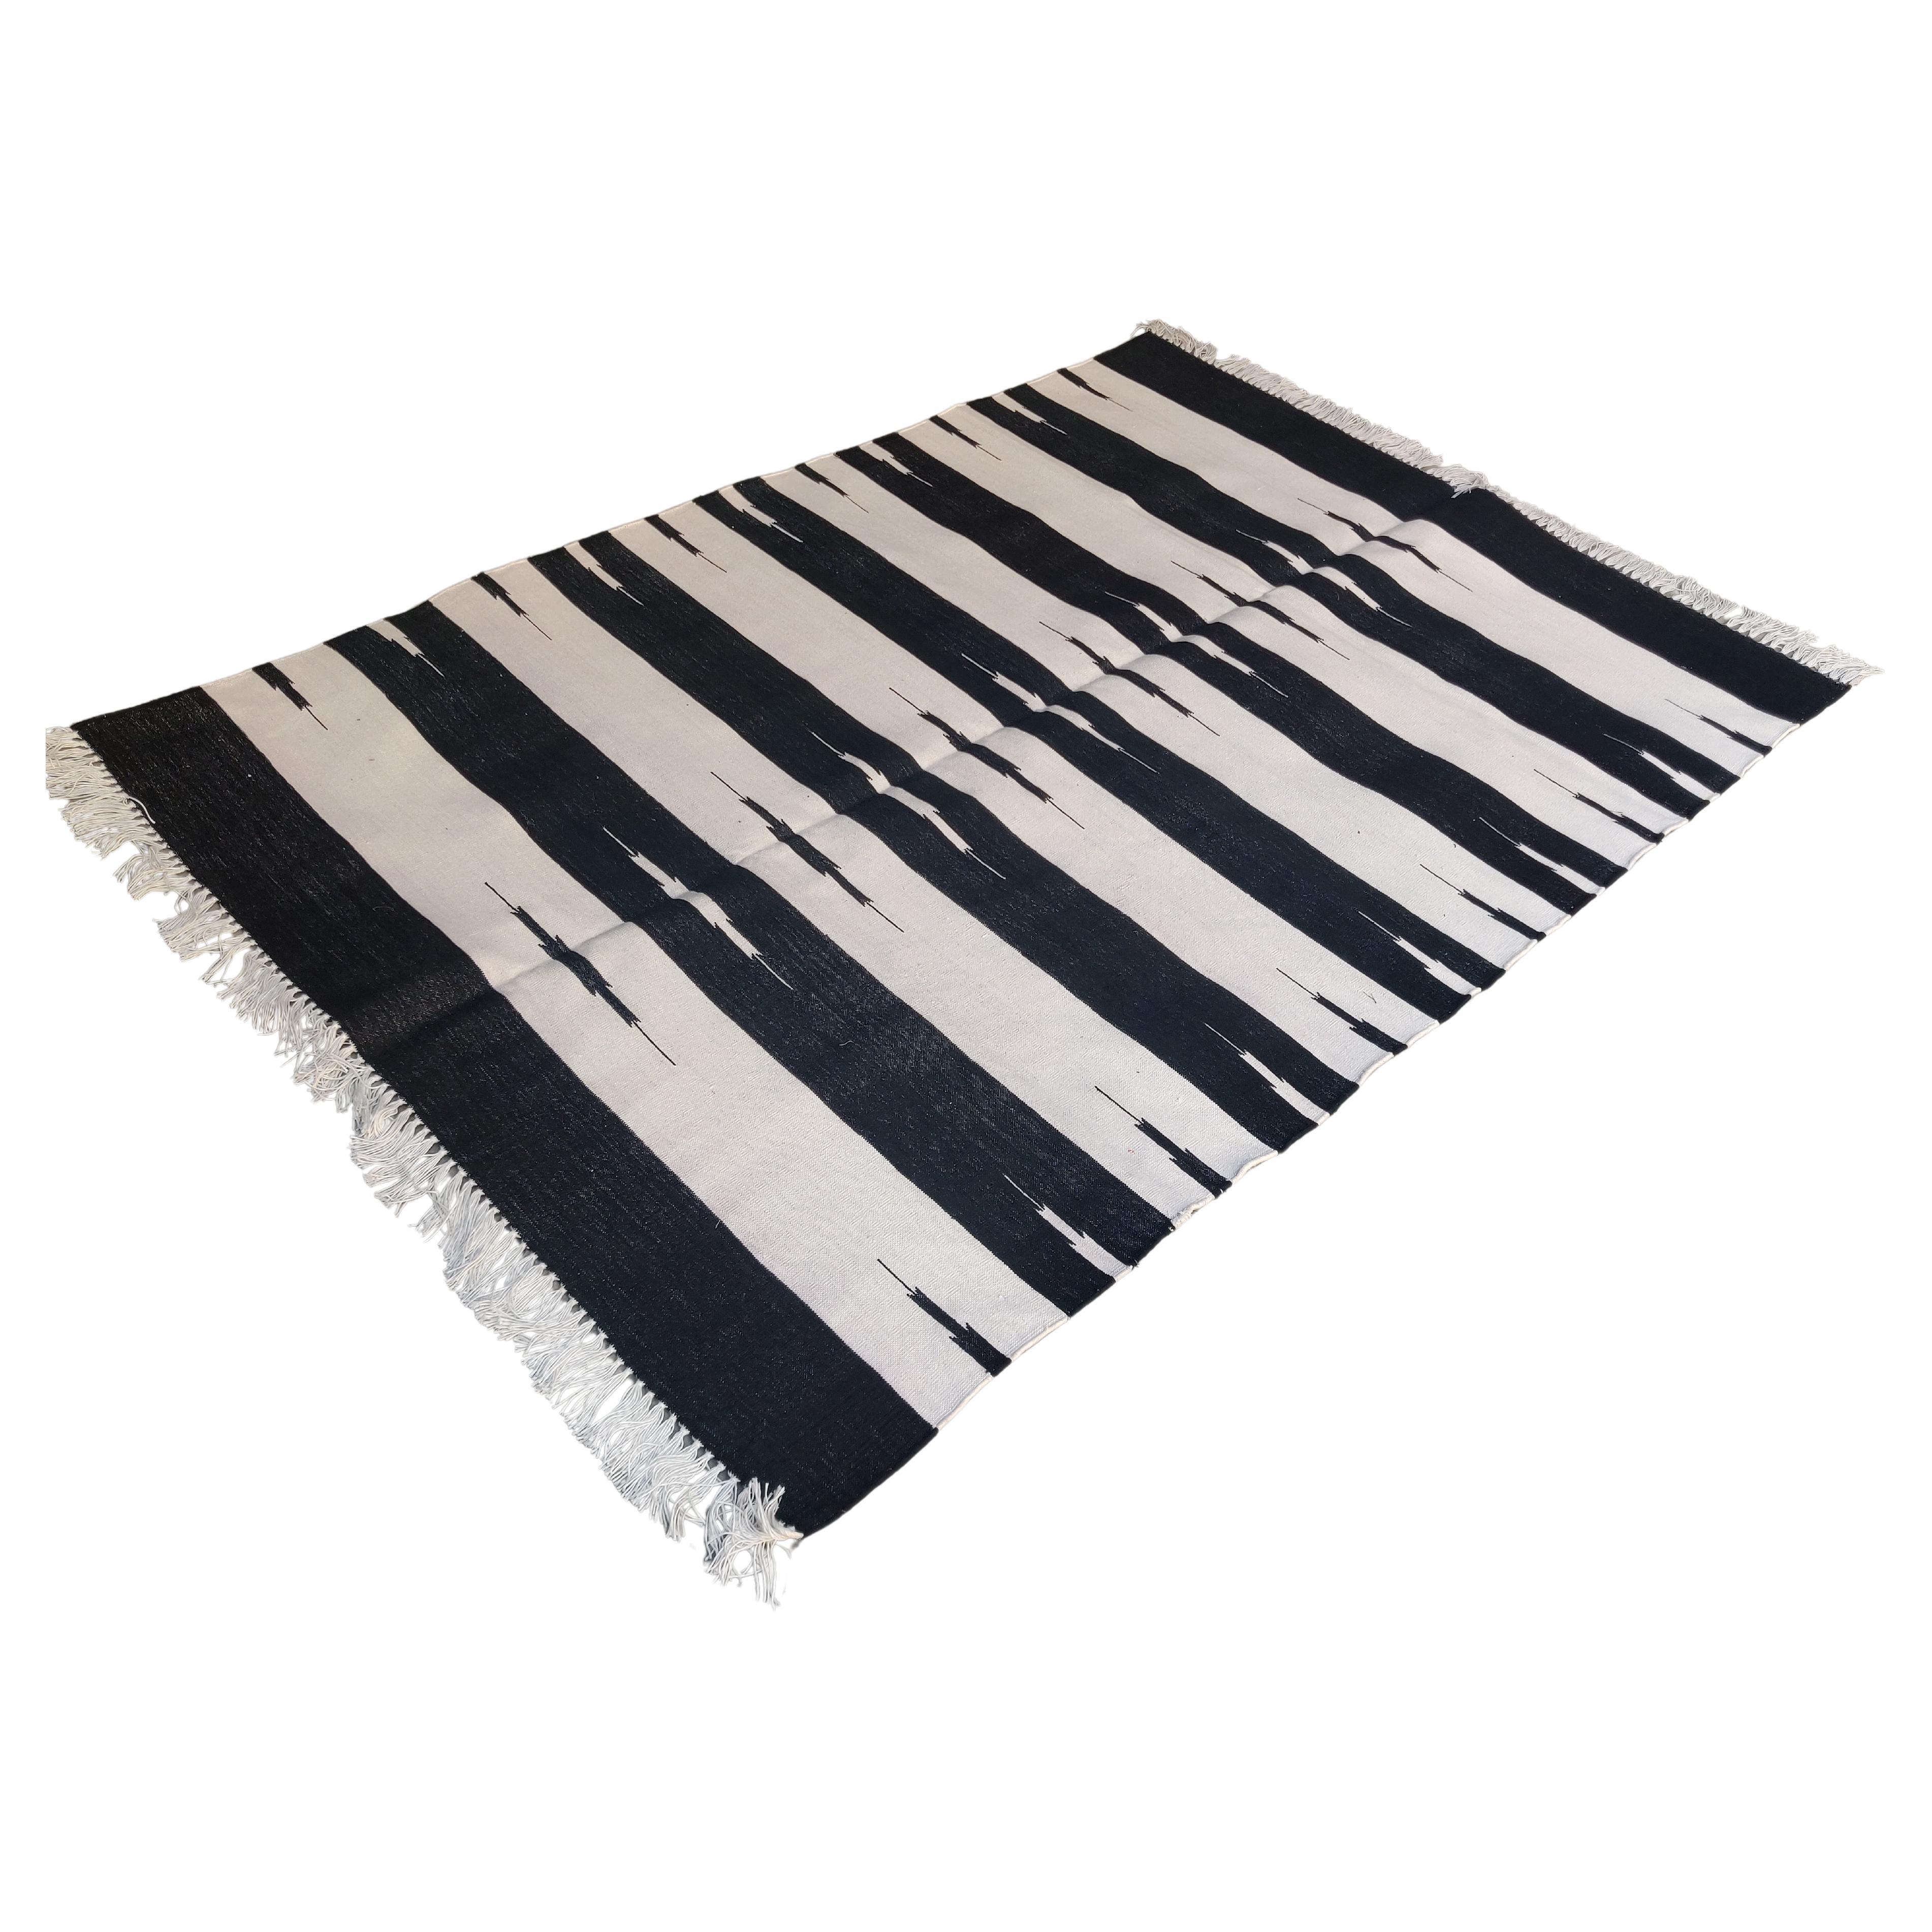 Handmade Cotton Area Flat Weave Rug, 4x6 Black And White Striped Indian Dhurrie For Sale